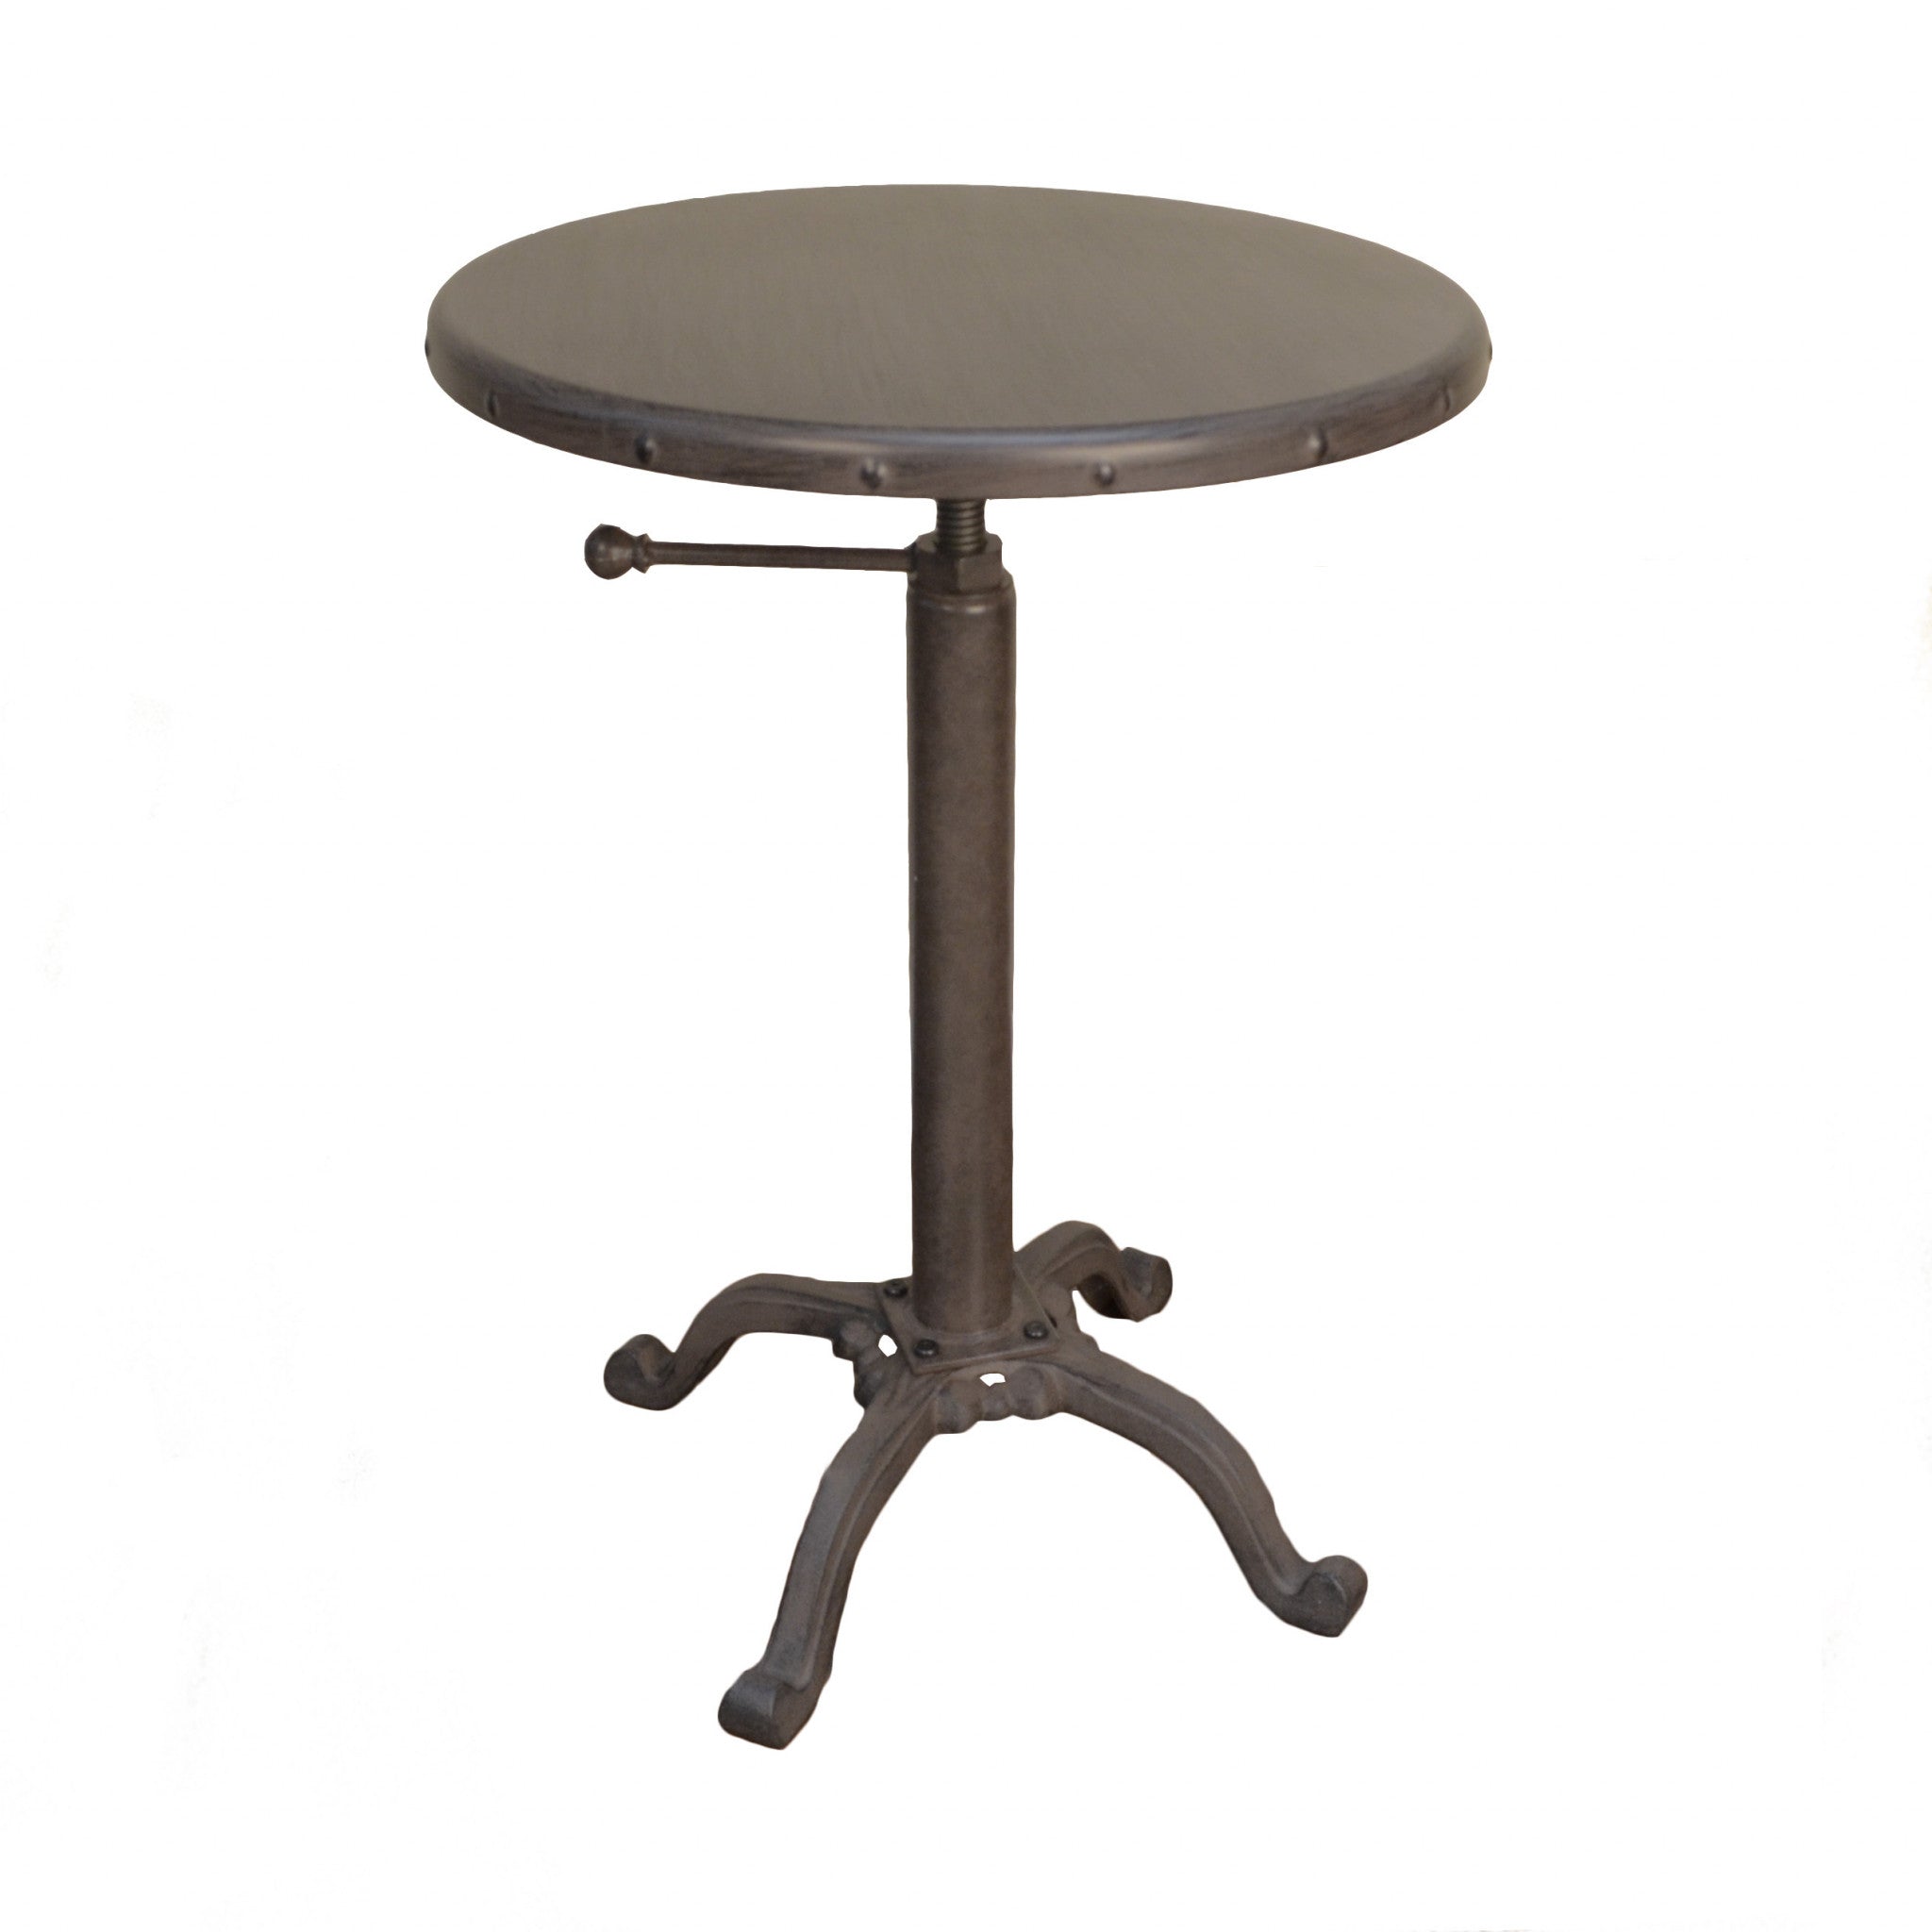 22" Industrial And Inustrial Iron Round End Table